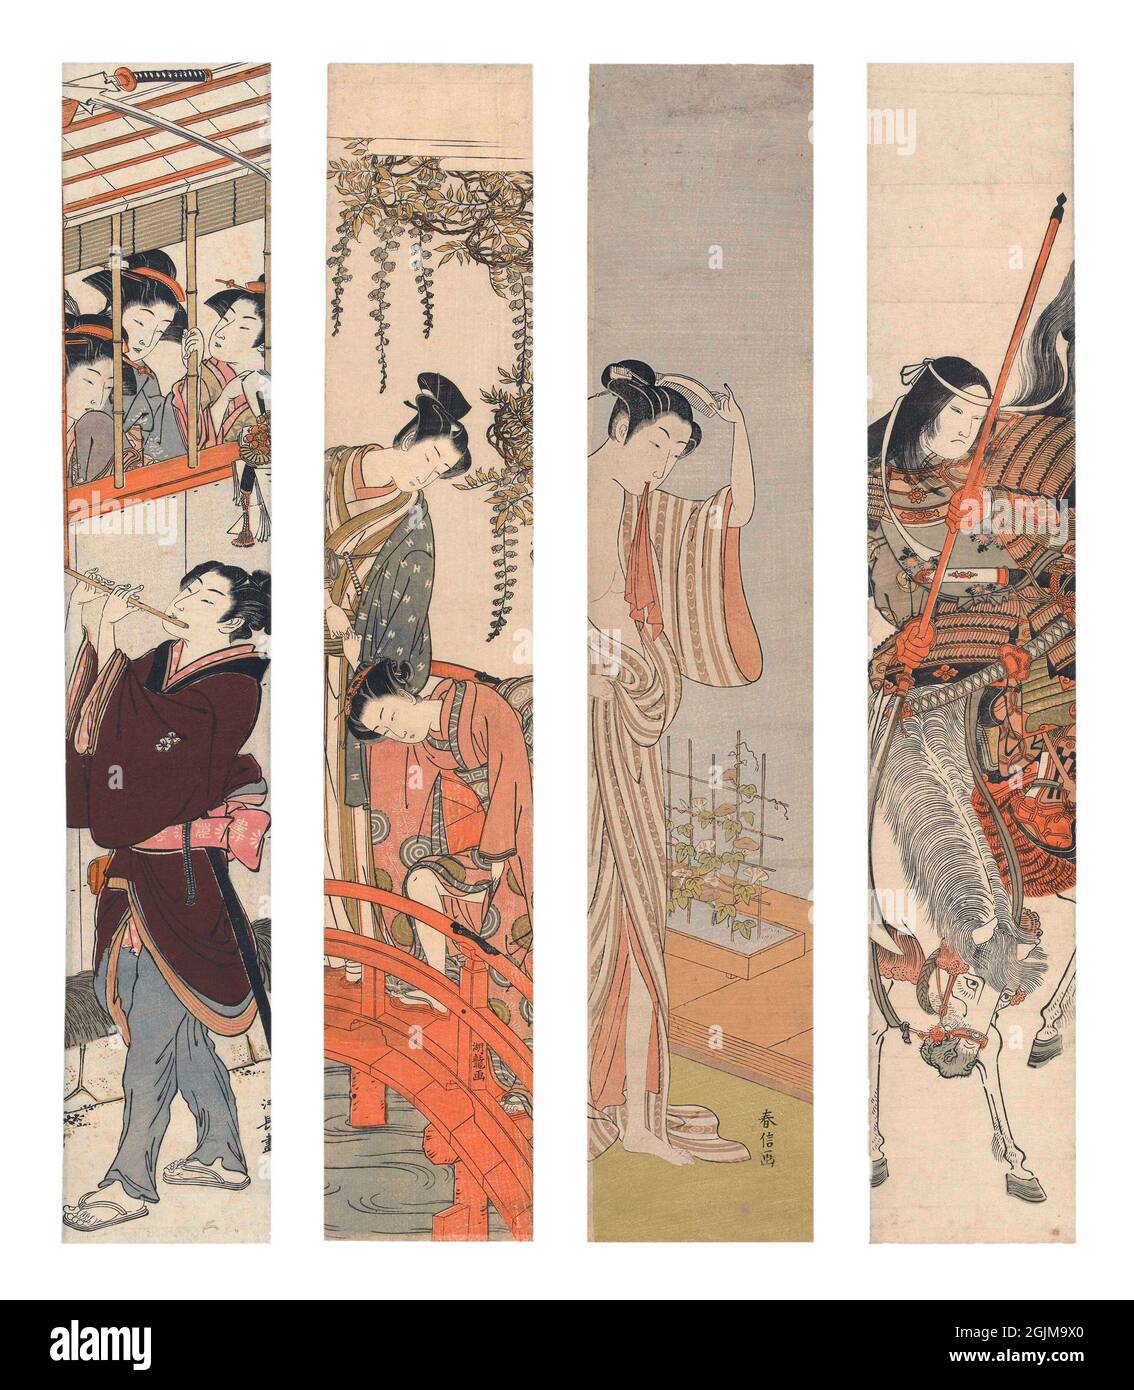 Selection of 4 Japanese painted woodcuts. Left to right: 1. Letter-writing courtesan spied on by two men (1765-70) 2.Young man helping woman up the steep red bridge at the Kameido shrine; under blooming wisteria (1770 - 1780) 3. Japanese woman, just out of the bath, in an open kimono. Blooming bindweed in the background (1768/69) 4. Female warrior Tomoe Gozen in armor with sword on horse  Unique optimised and enhanced arrangement of four eighteenth and nineteenth century Japanese woodcut illustrations. Stock Photo